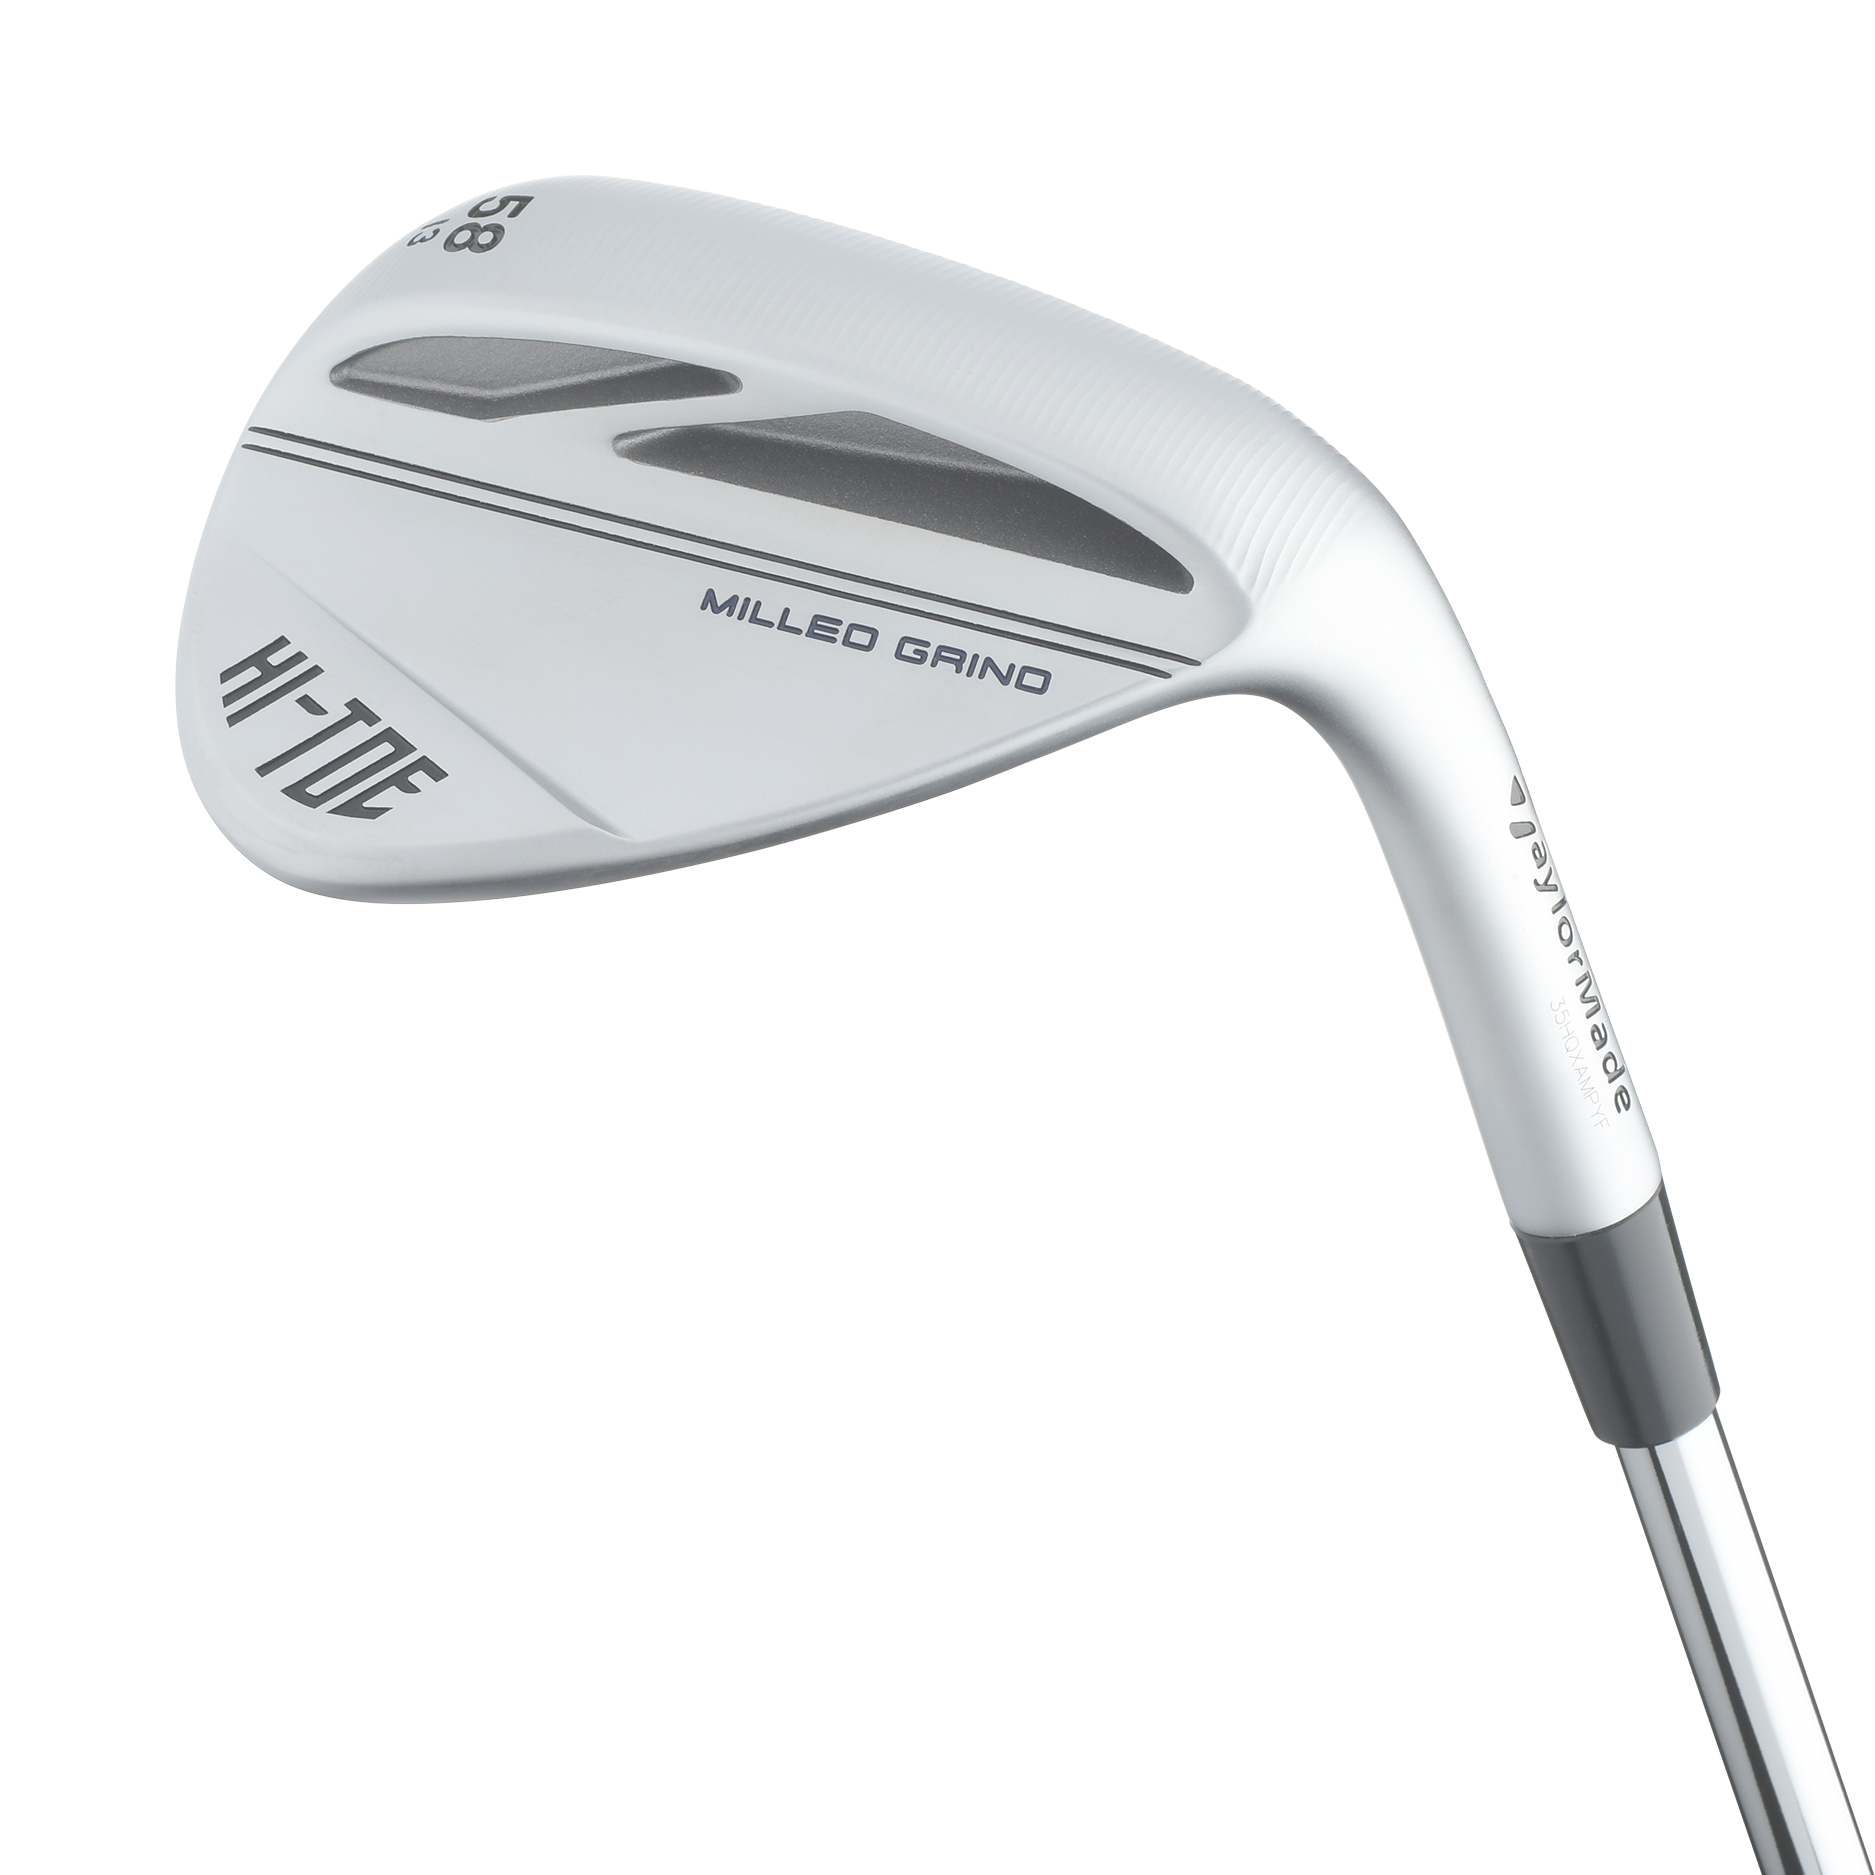 TaylorMade Hi-Toe 3 wedge: What you need to know | Golf Equipment 